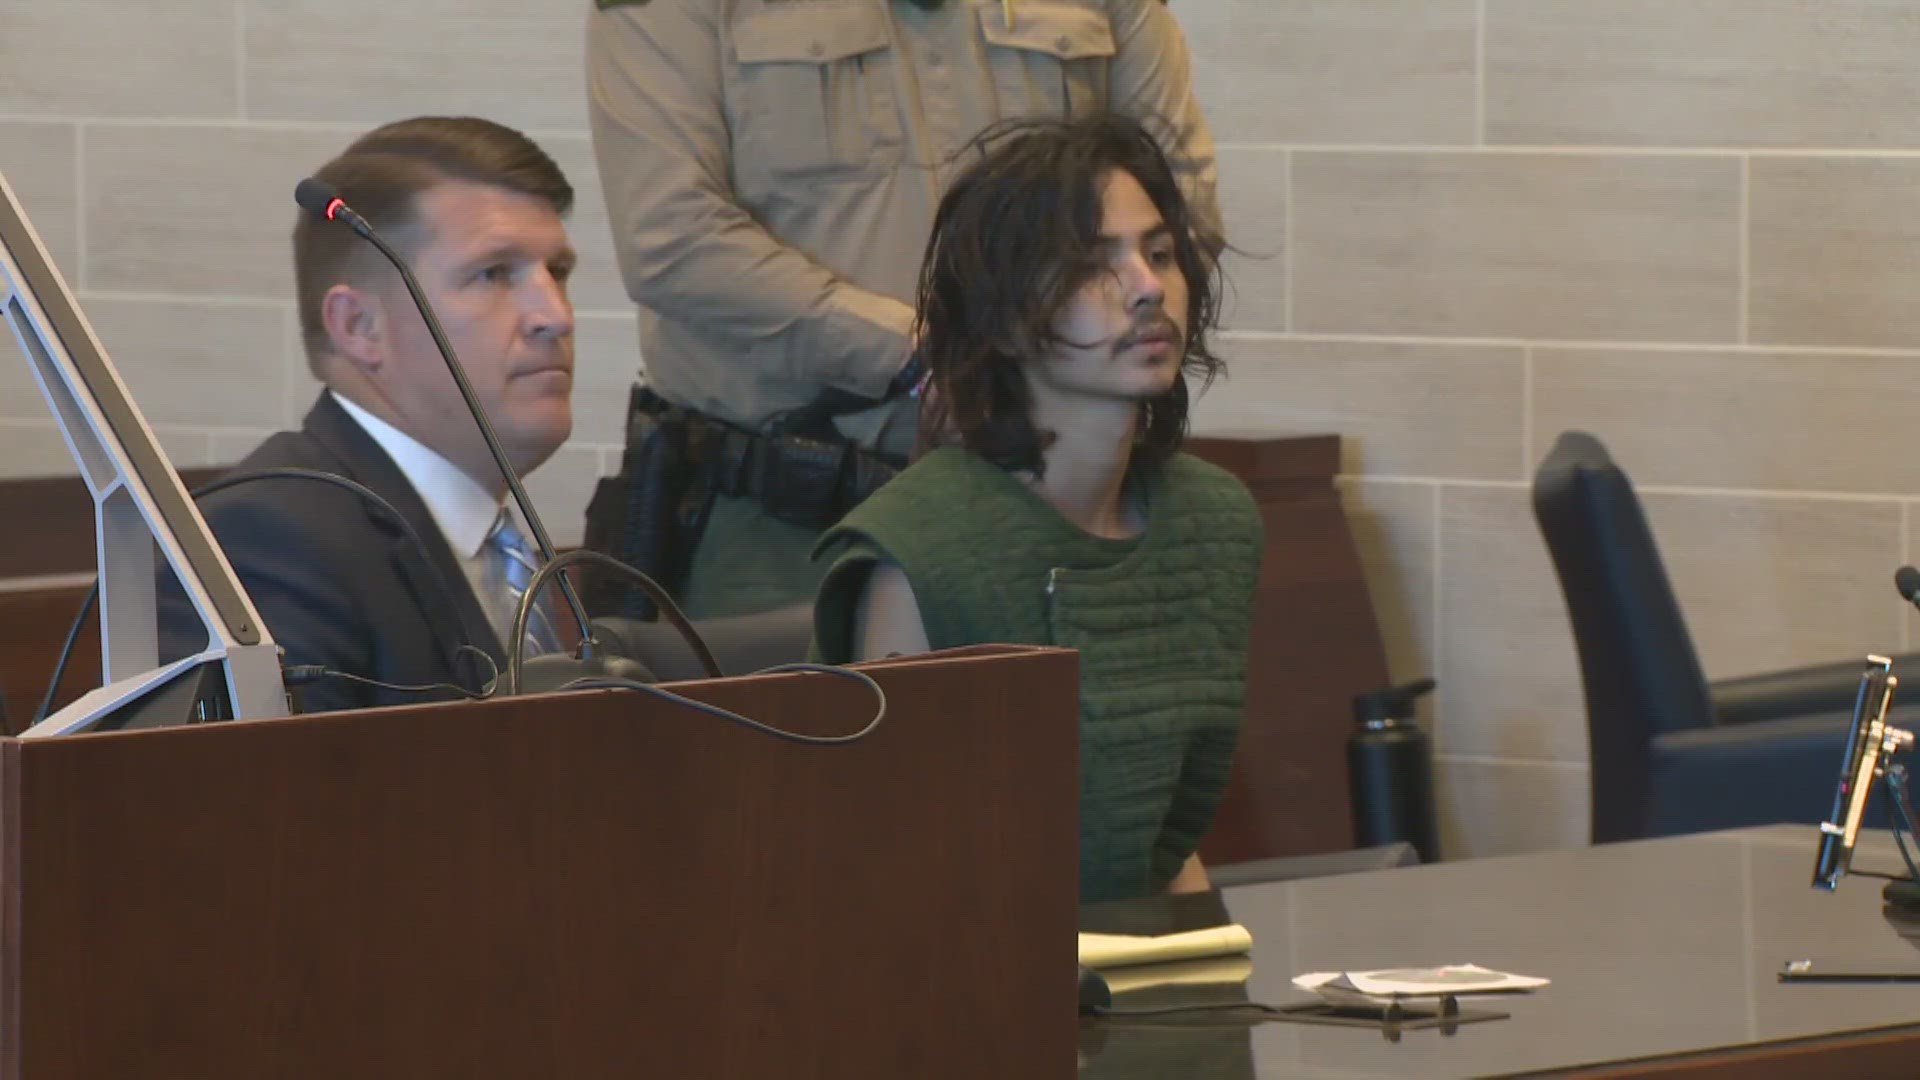 Carlos Dominguez, the man accused of stabbing three people in Davis and killing two of them, appeared in court Tuesday.